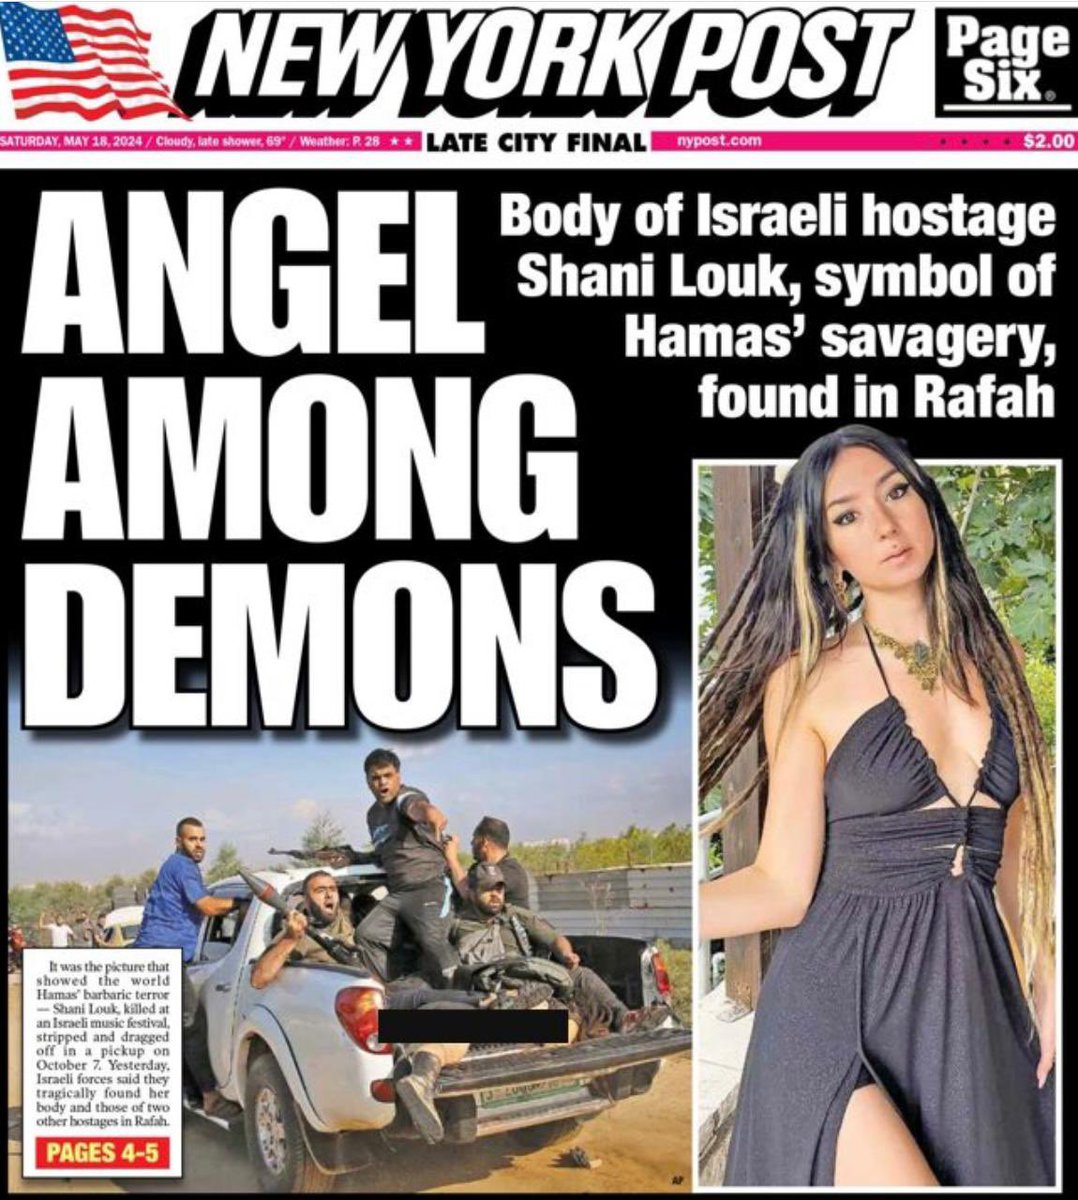 The New York Post cover says it all.
#bringthemhomenow